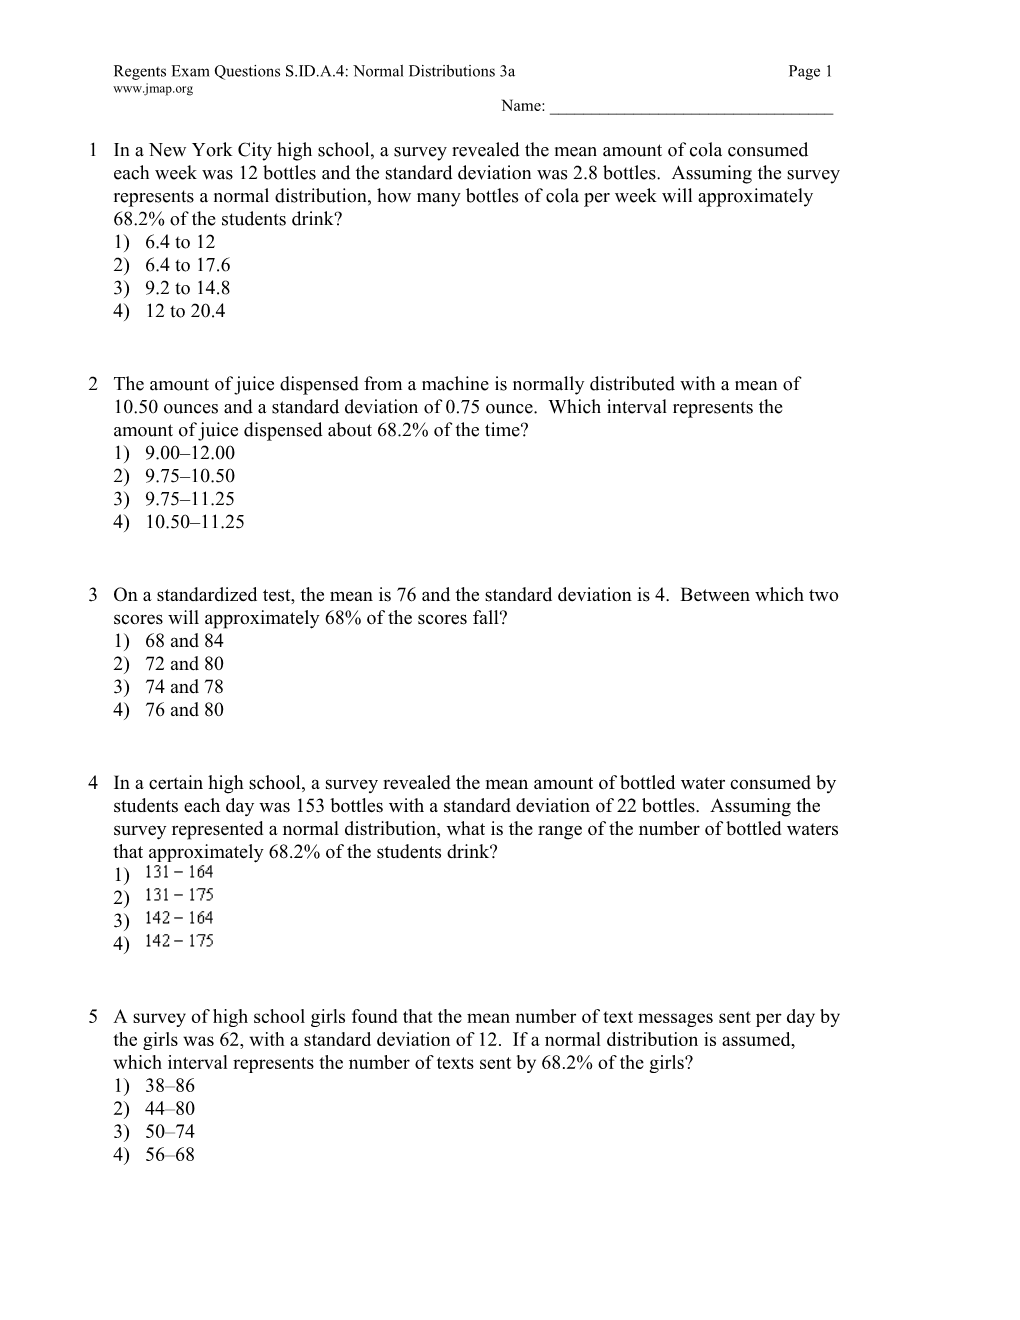 Regents Exam Questions S.ID.A.4: Normal Distributions 3Apage 1